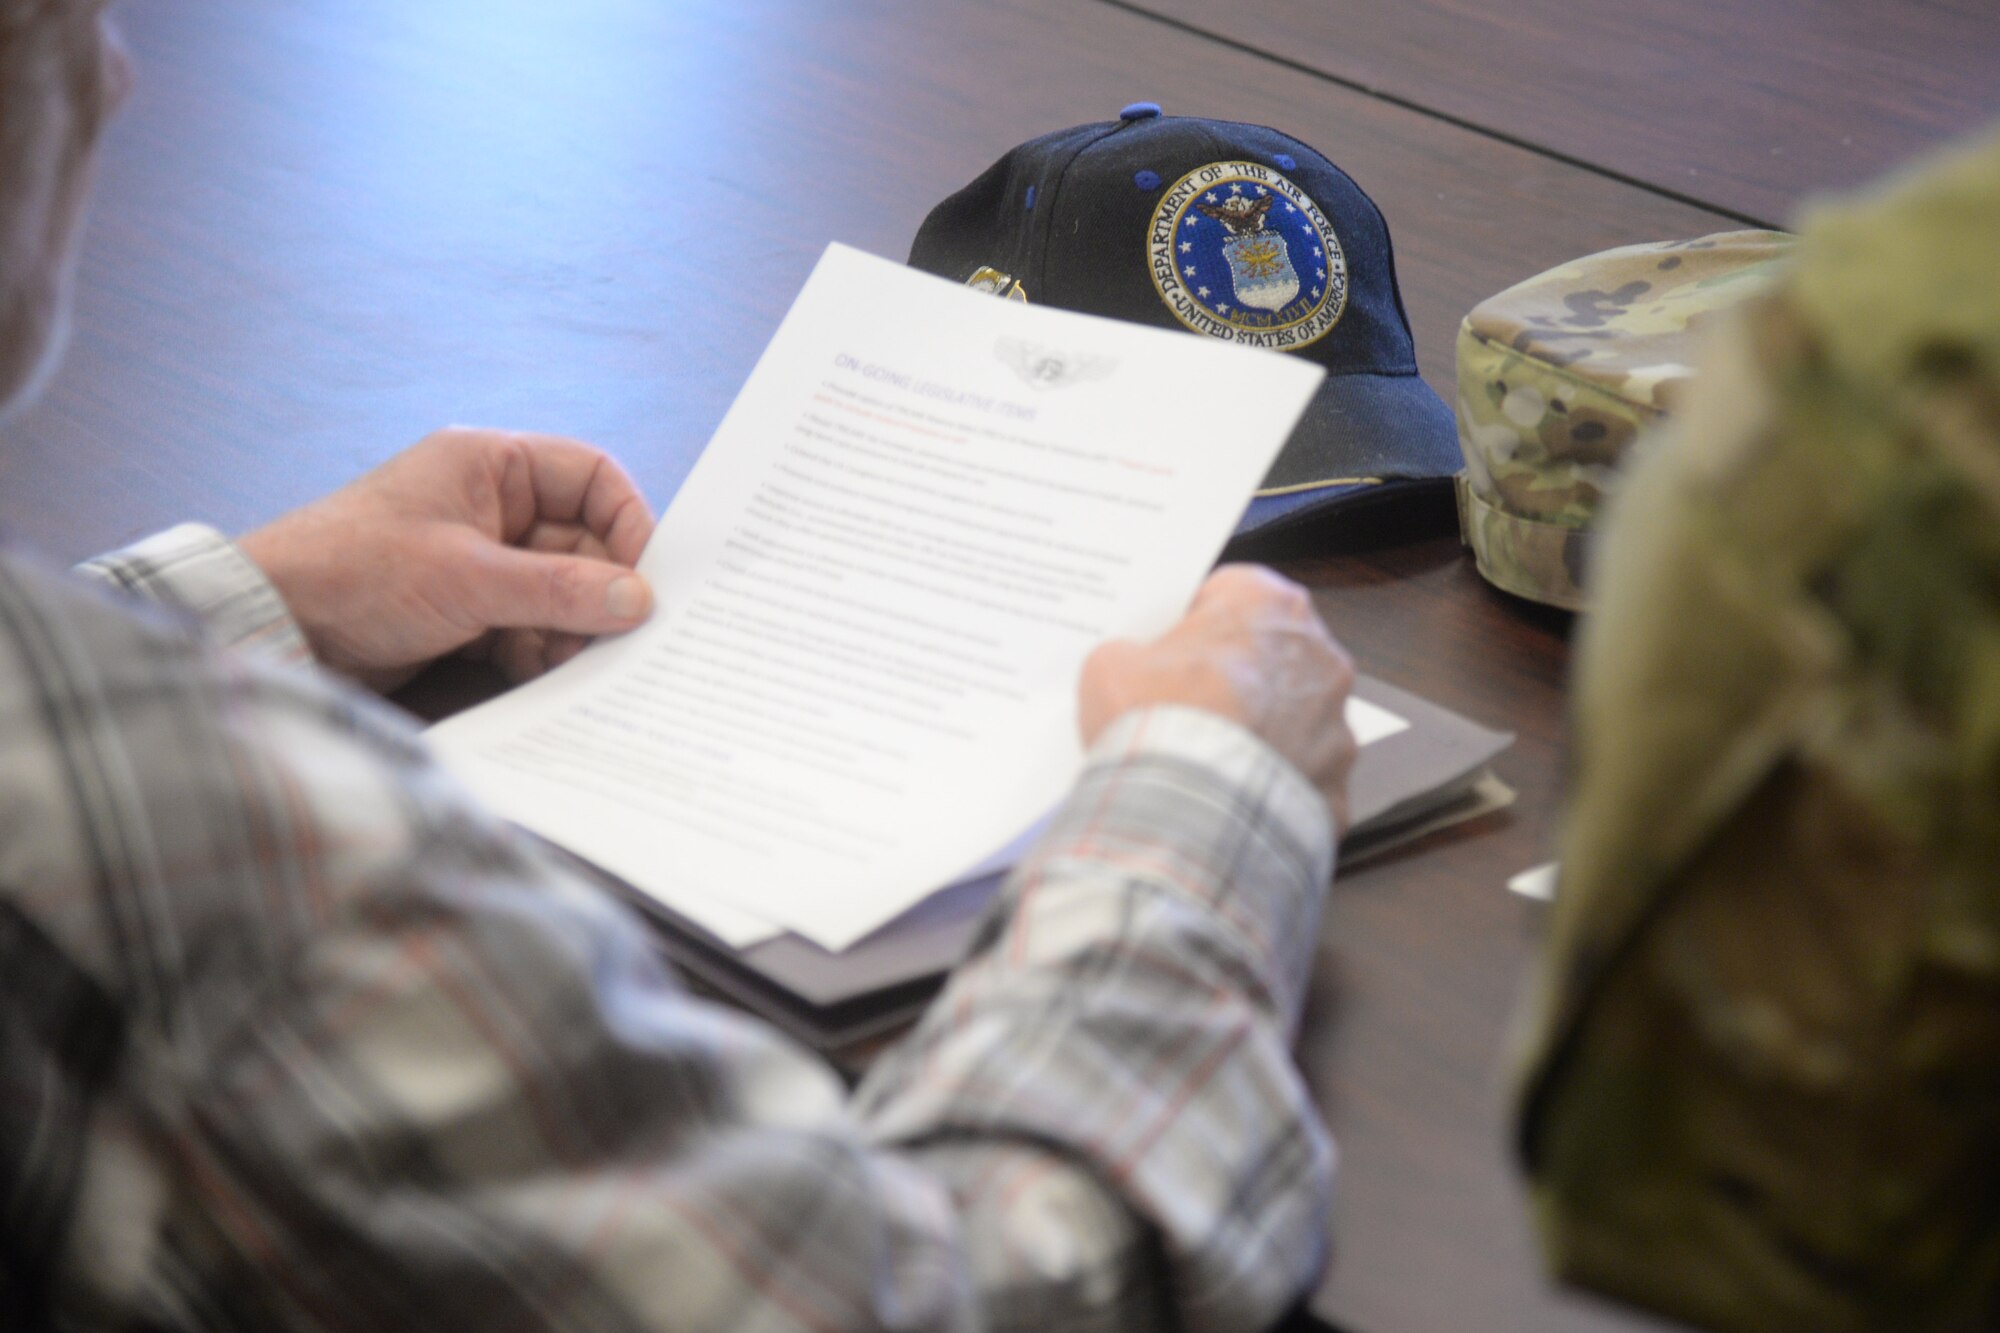 Jim Simmonds, Air Force Sergeants Association recruiter, looks over legislation during a meeting July 10, 2019, at Malmstrom Air Force Base, Mont.